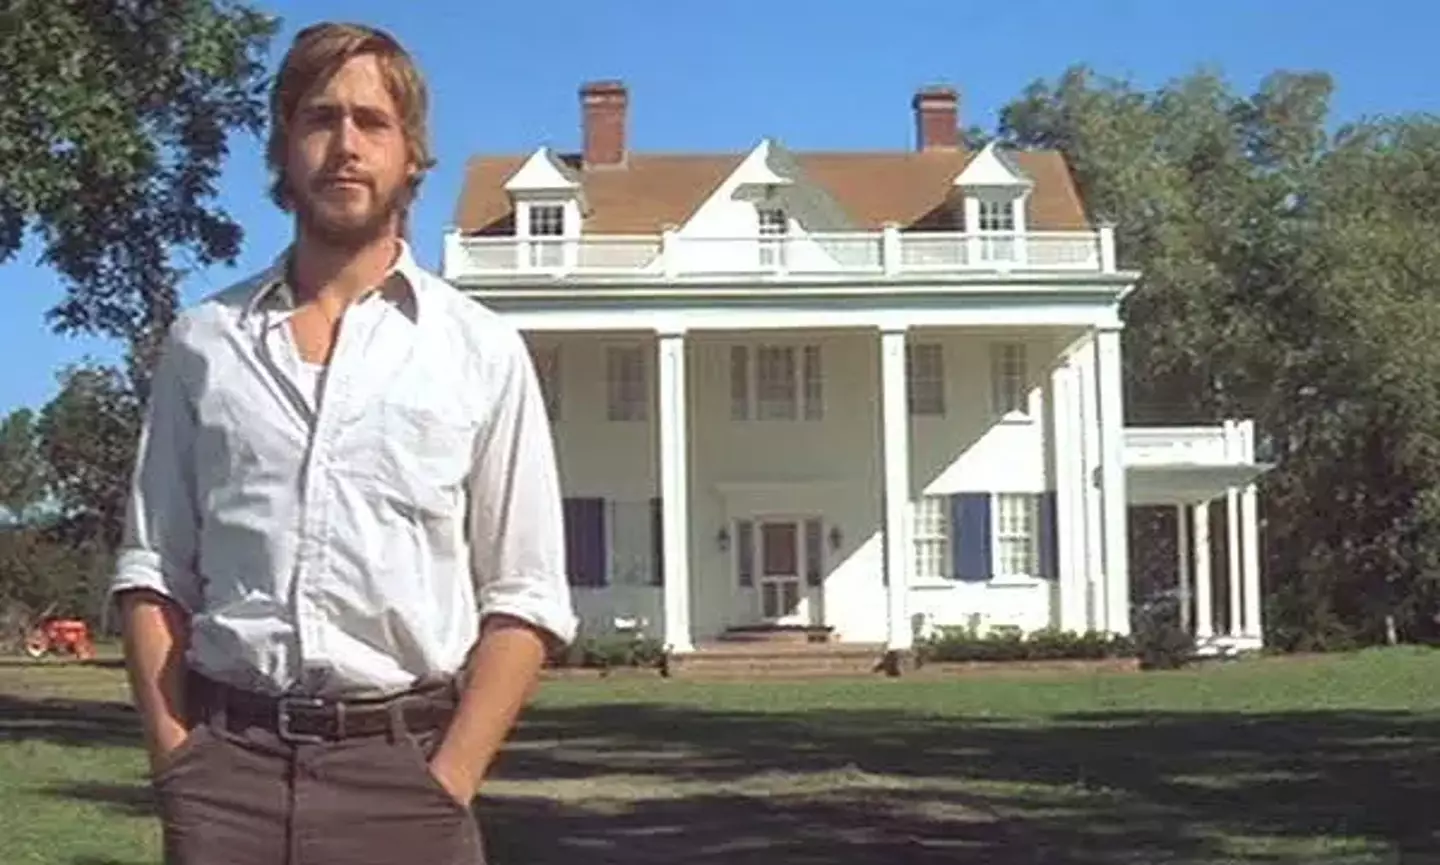 Noah built Allie her dream house in The Notebook. (New Line Cinema)